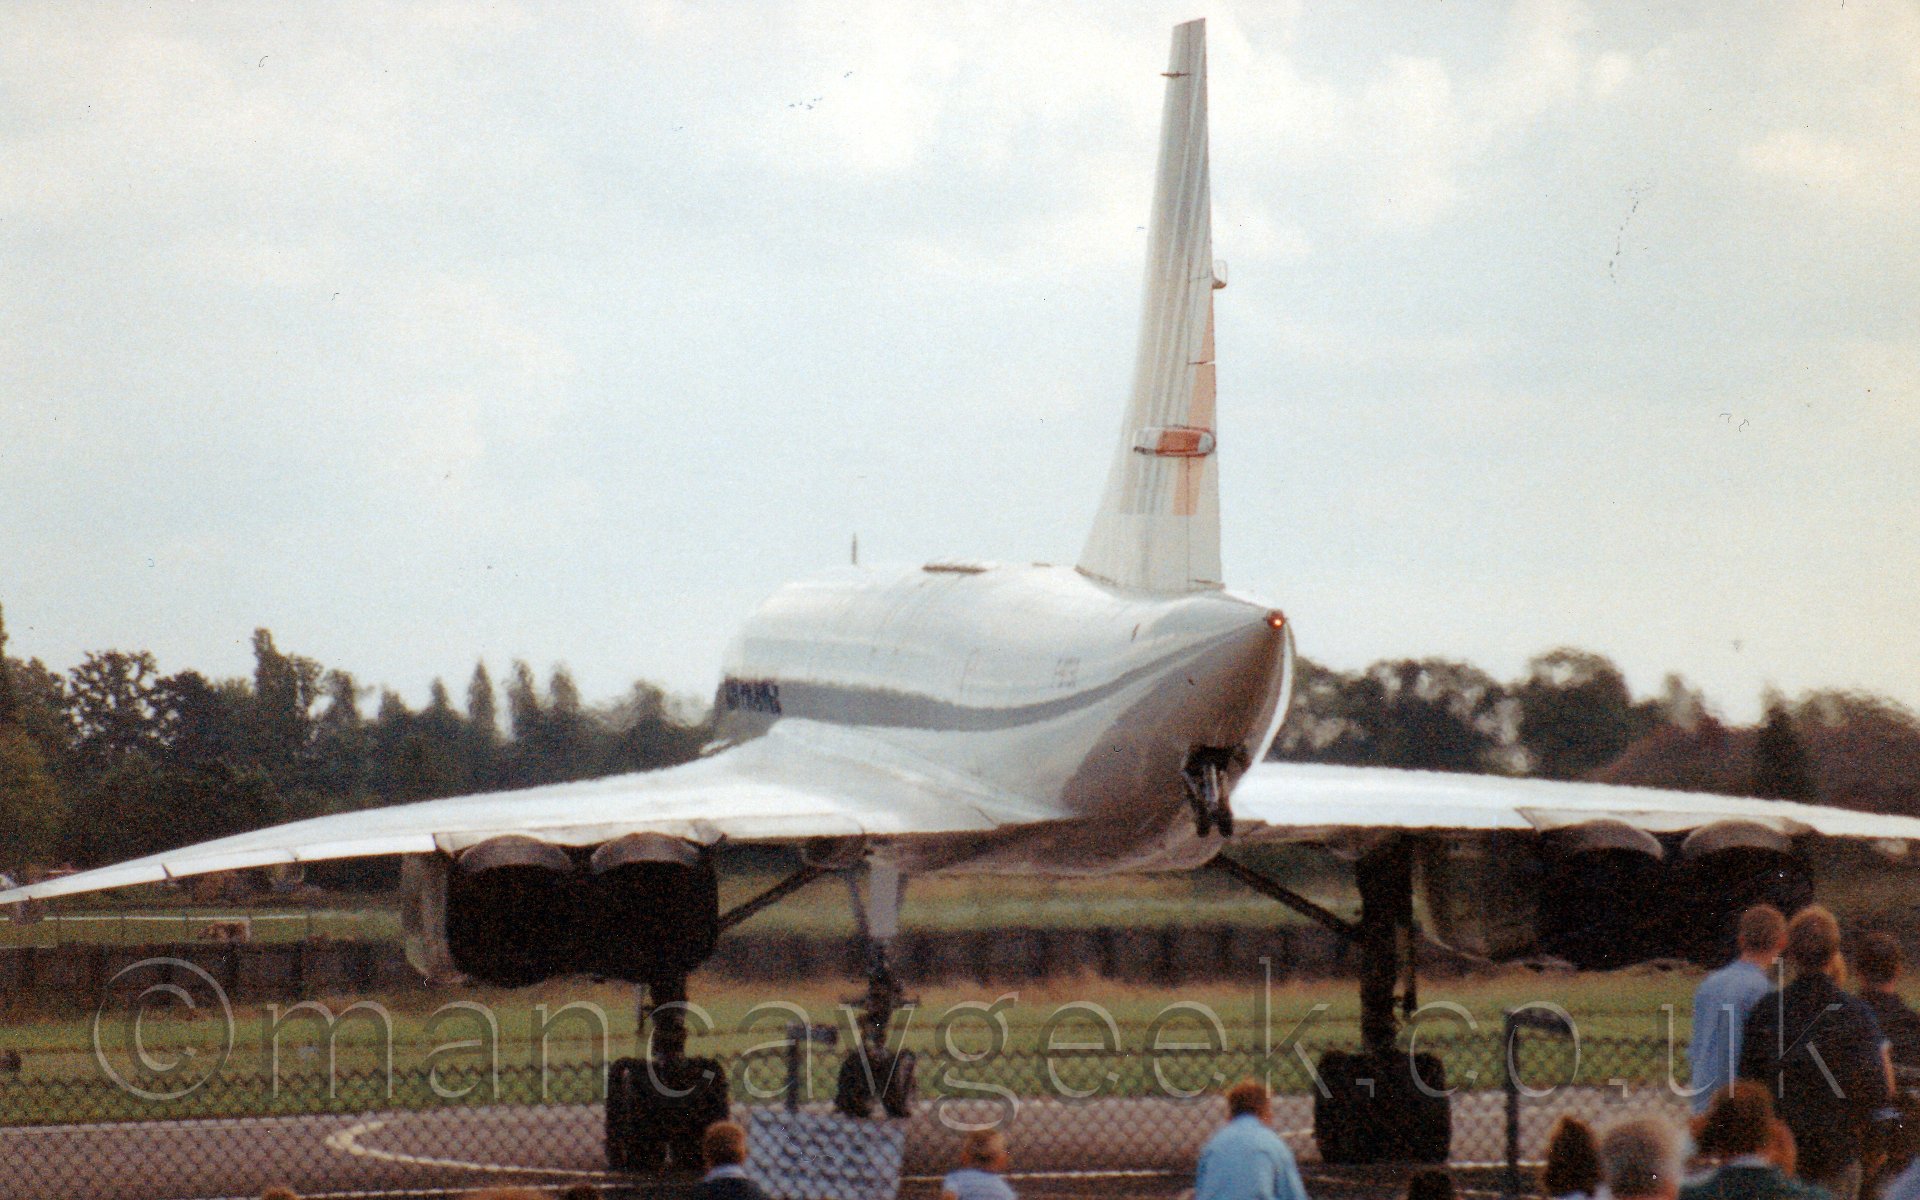 Rear view of a 4 engined, very thin, very long, very pointy jet airliner, with wings tilted slightly down, facing almost directly away from the camera and turning to the right. The plane is almost entirely white, with a series of red and blue diagonal stripes on the tail. A set of wheels, not connected to the ground, can be seen coming from below the tailcone. In the foreground, a group of people can be seen watching it through a chain link fence topped with barbed wire, while in the background, grass and trees meet a bright white sky.